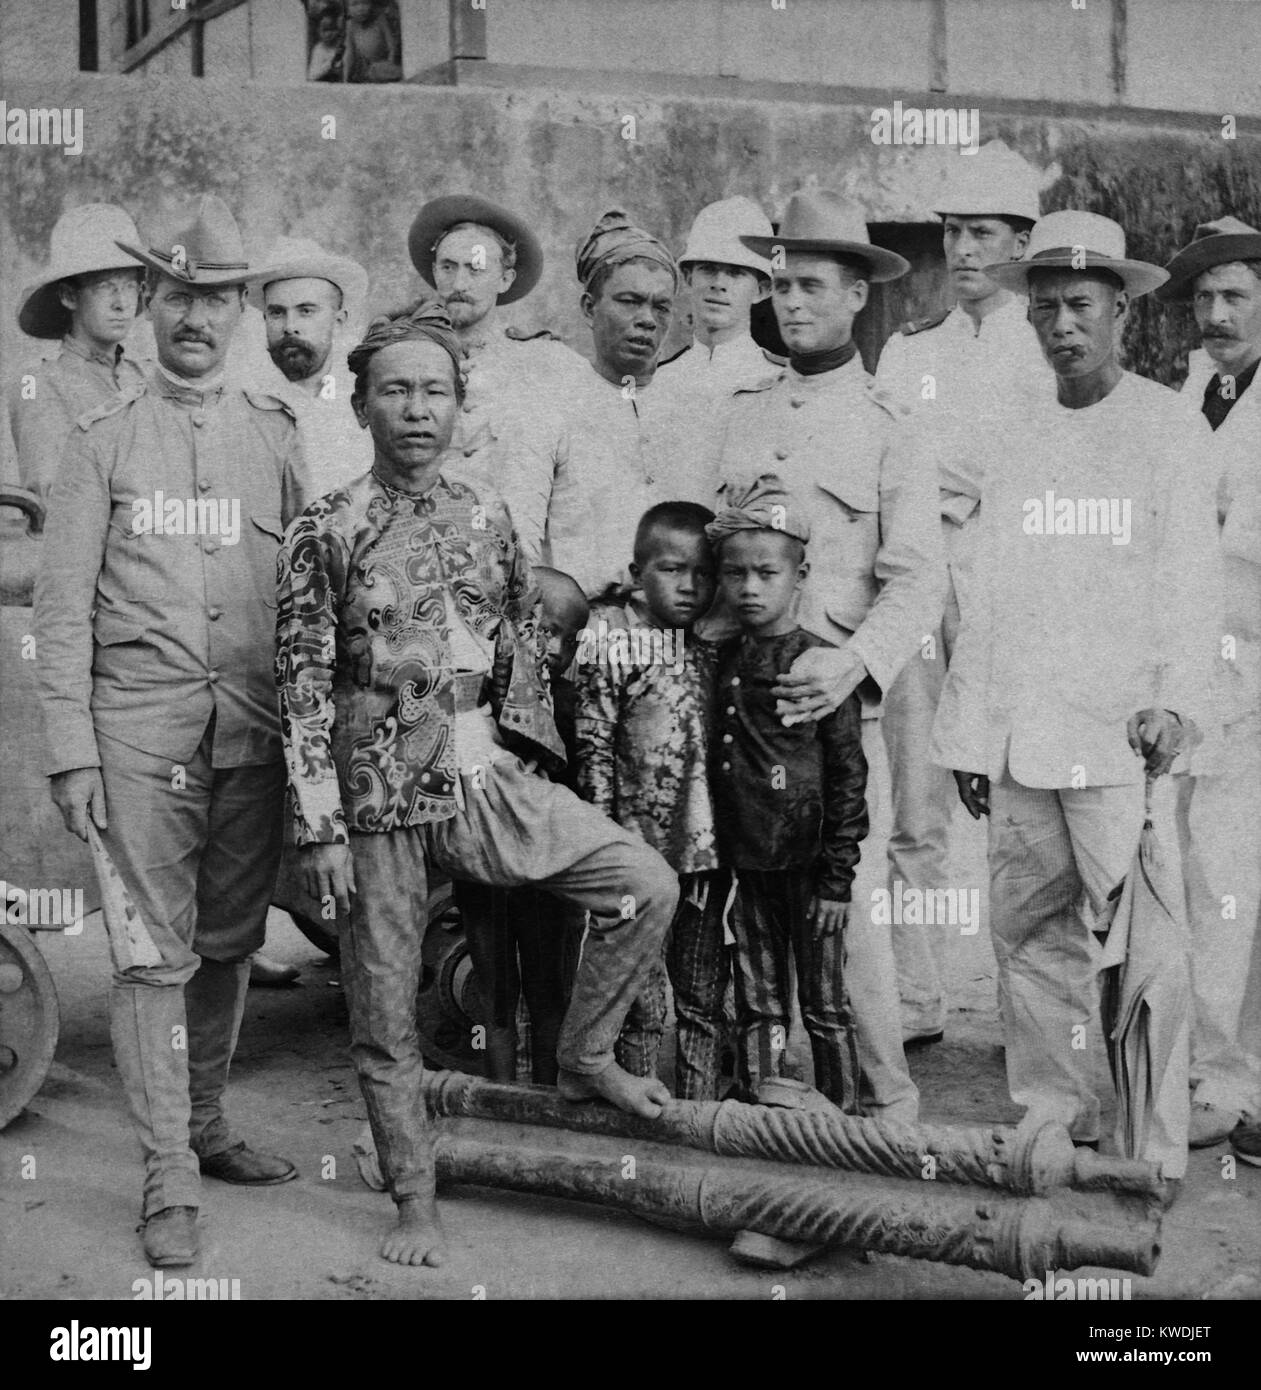 Datu Piang, chief of 10,000 followers in the Colabato hills of Mindanao, Philippine Islands, with American Officers. Ca. 1899-1900. He was a non-royal son of a Chinese father and Moro mother who accepted American authority without strife (BSLOC 2017 10 94) Stock Photo